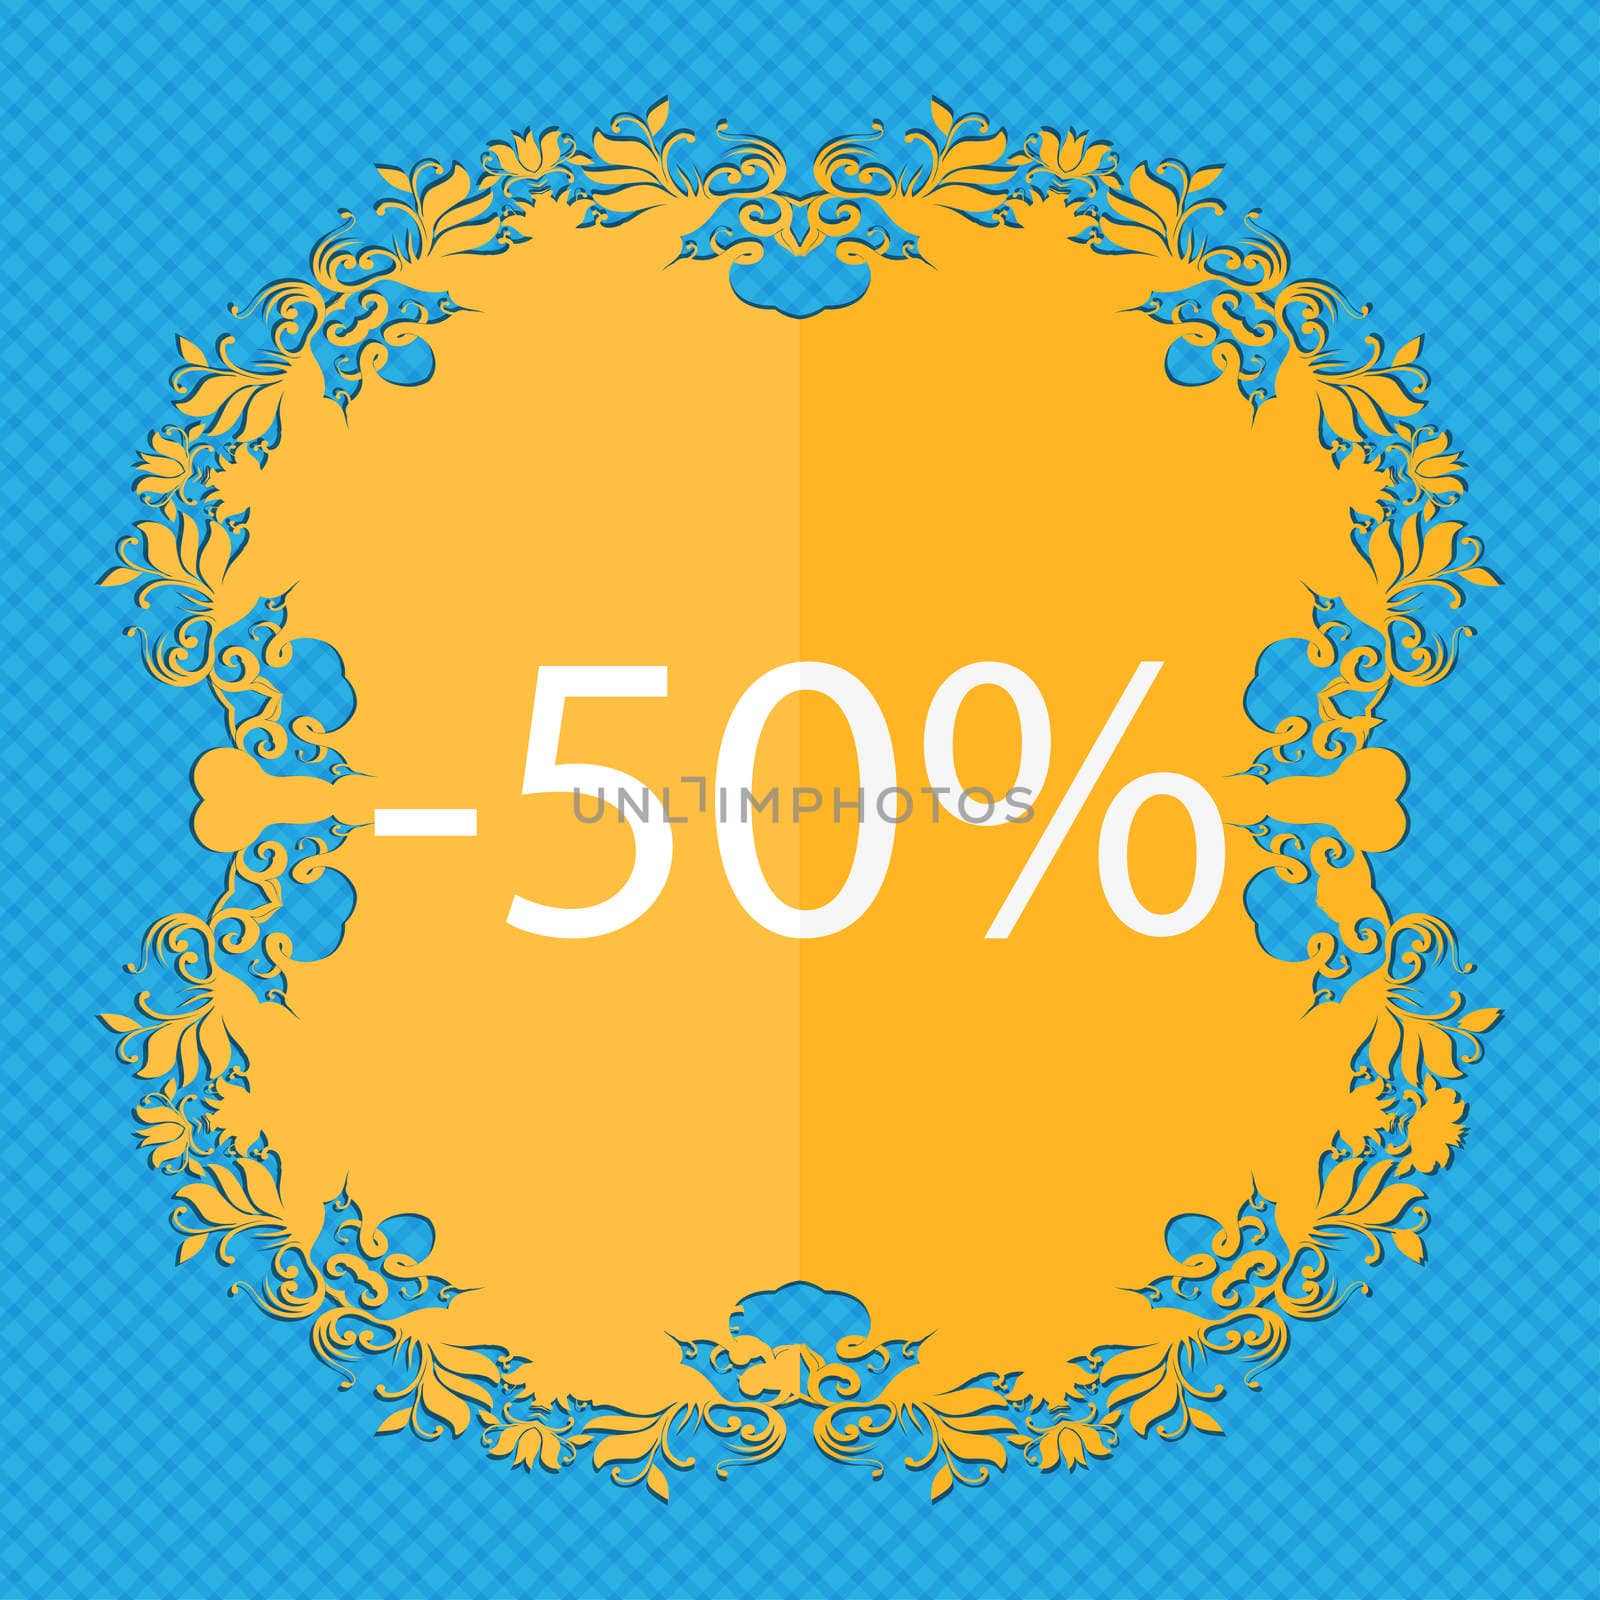 50 percent discount sign icon. Sale symbol. Special offer label. Floral flat design on a blue abstract background with place for your text. illustration